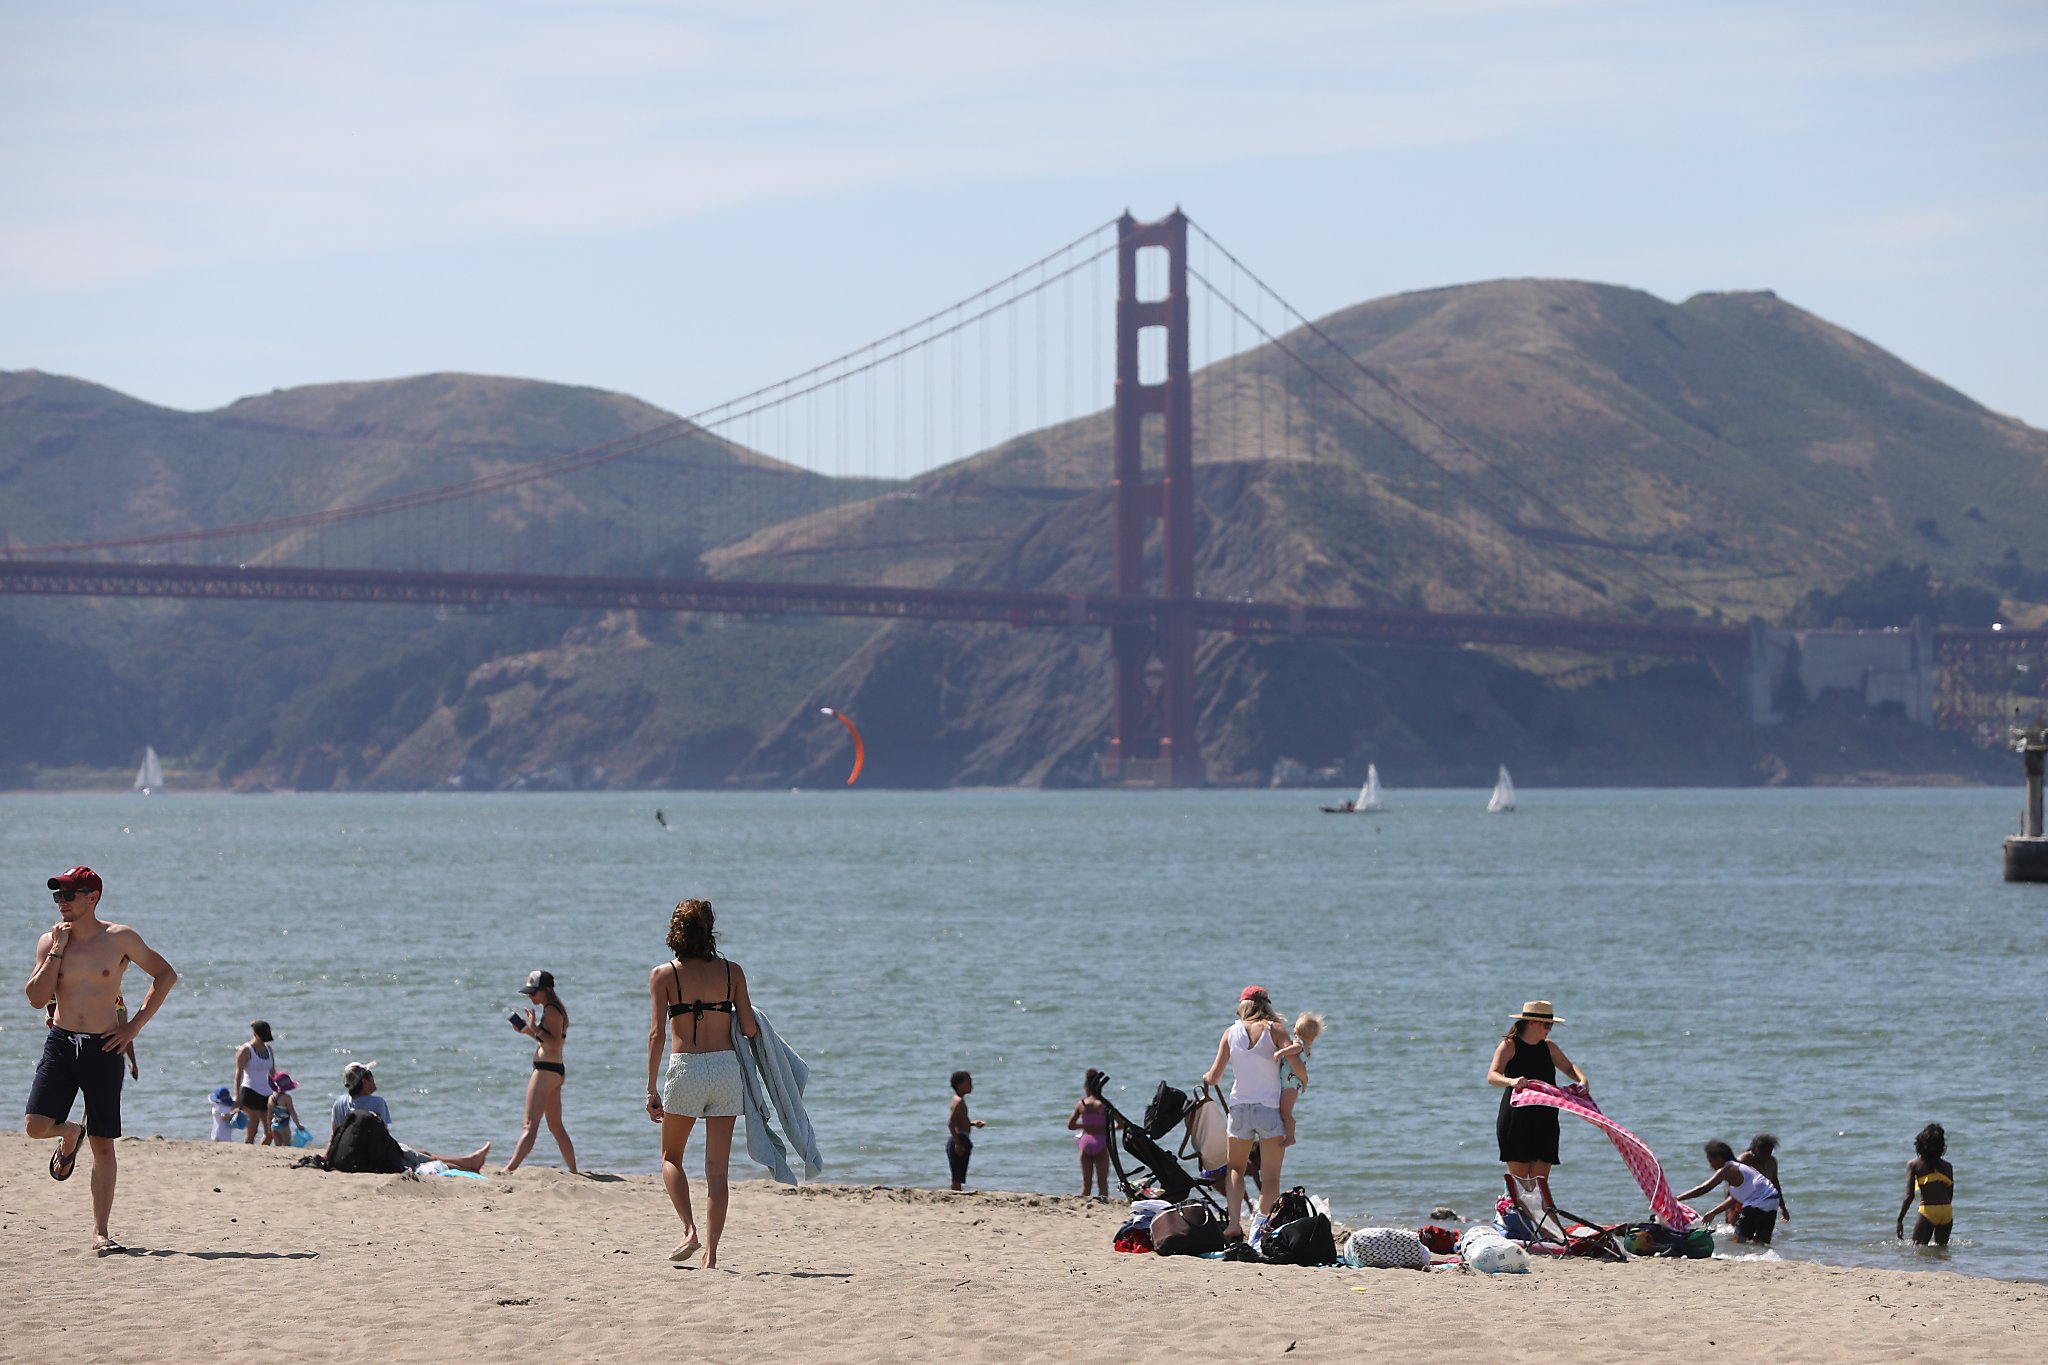 A hot day in San Francisco? That’s earthquake weather weather in san francisco now